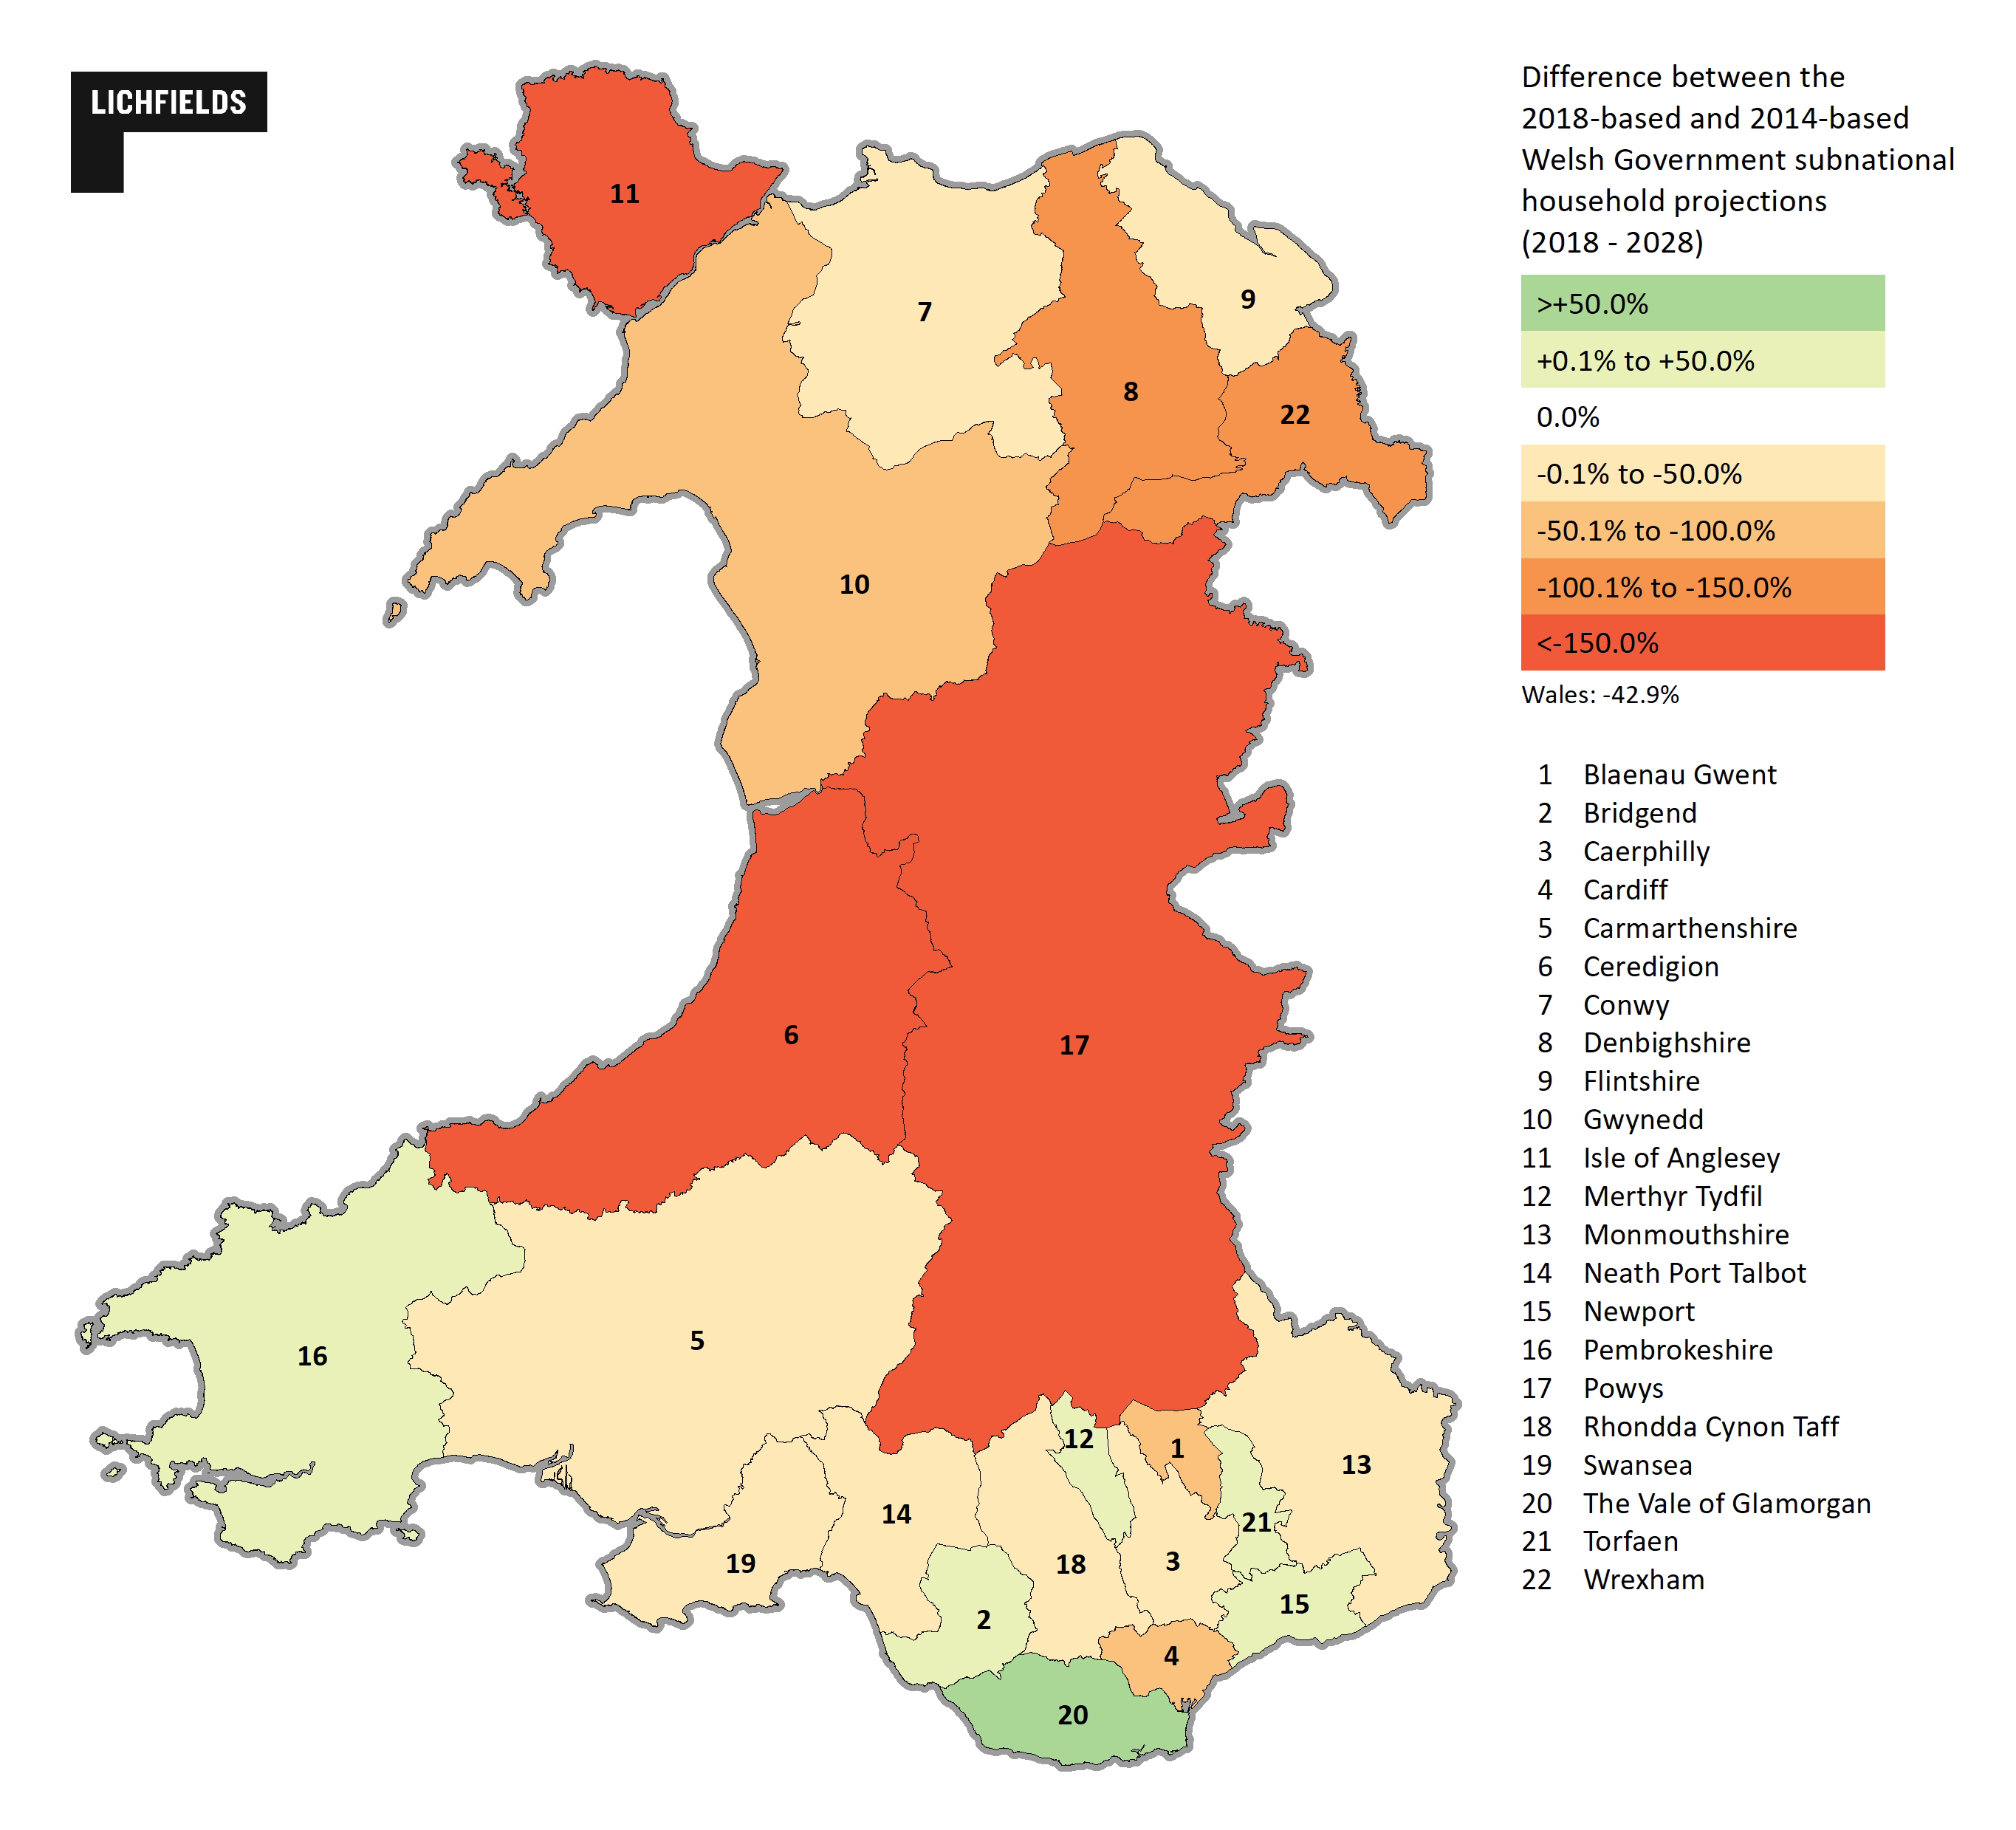 Figure 2 Difference between the Welsh Government 2018-based and 2014-based subnational household projections (2018-2028)